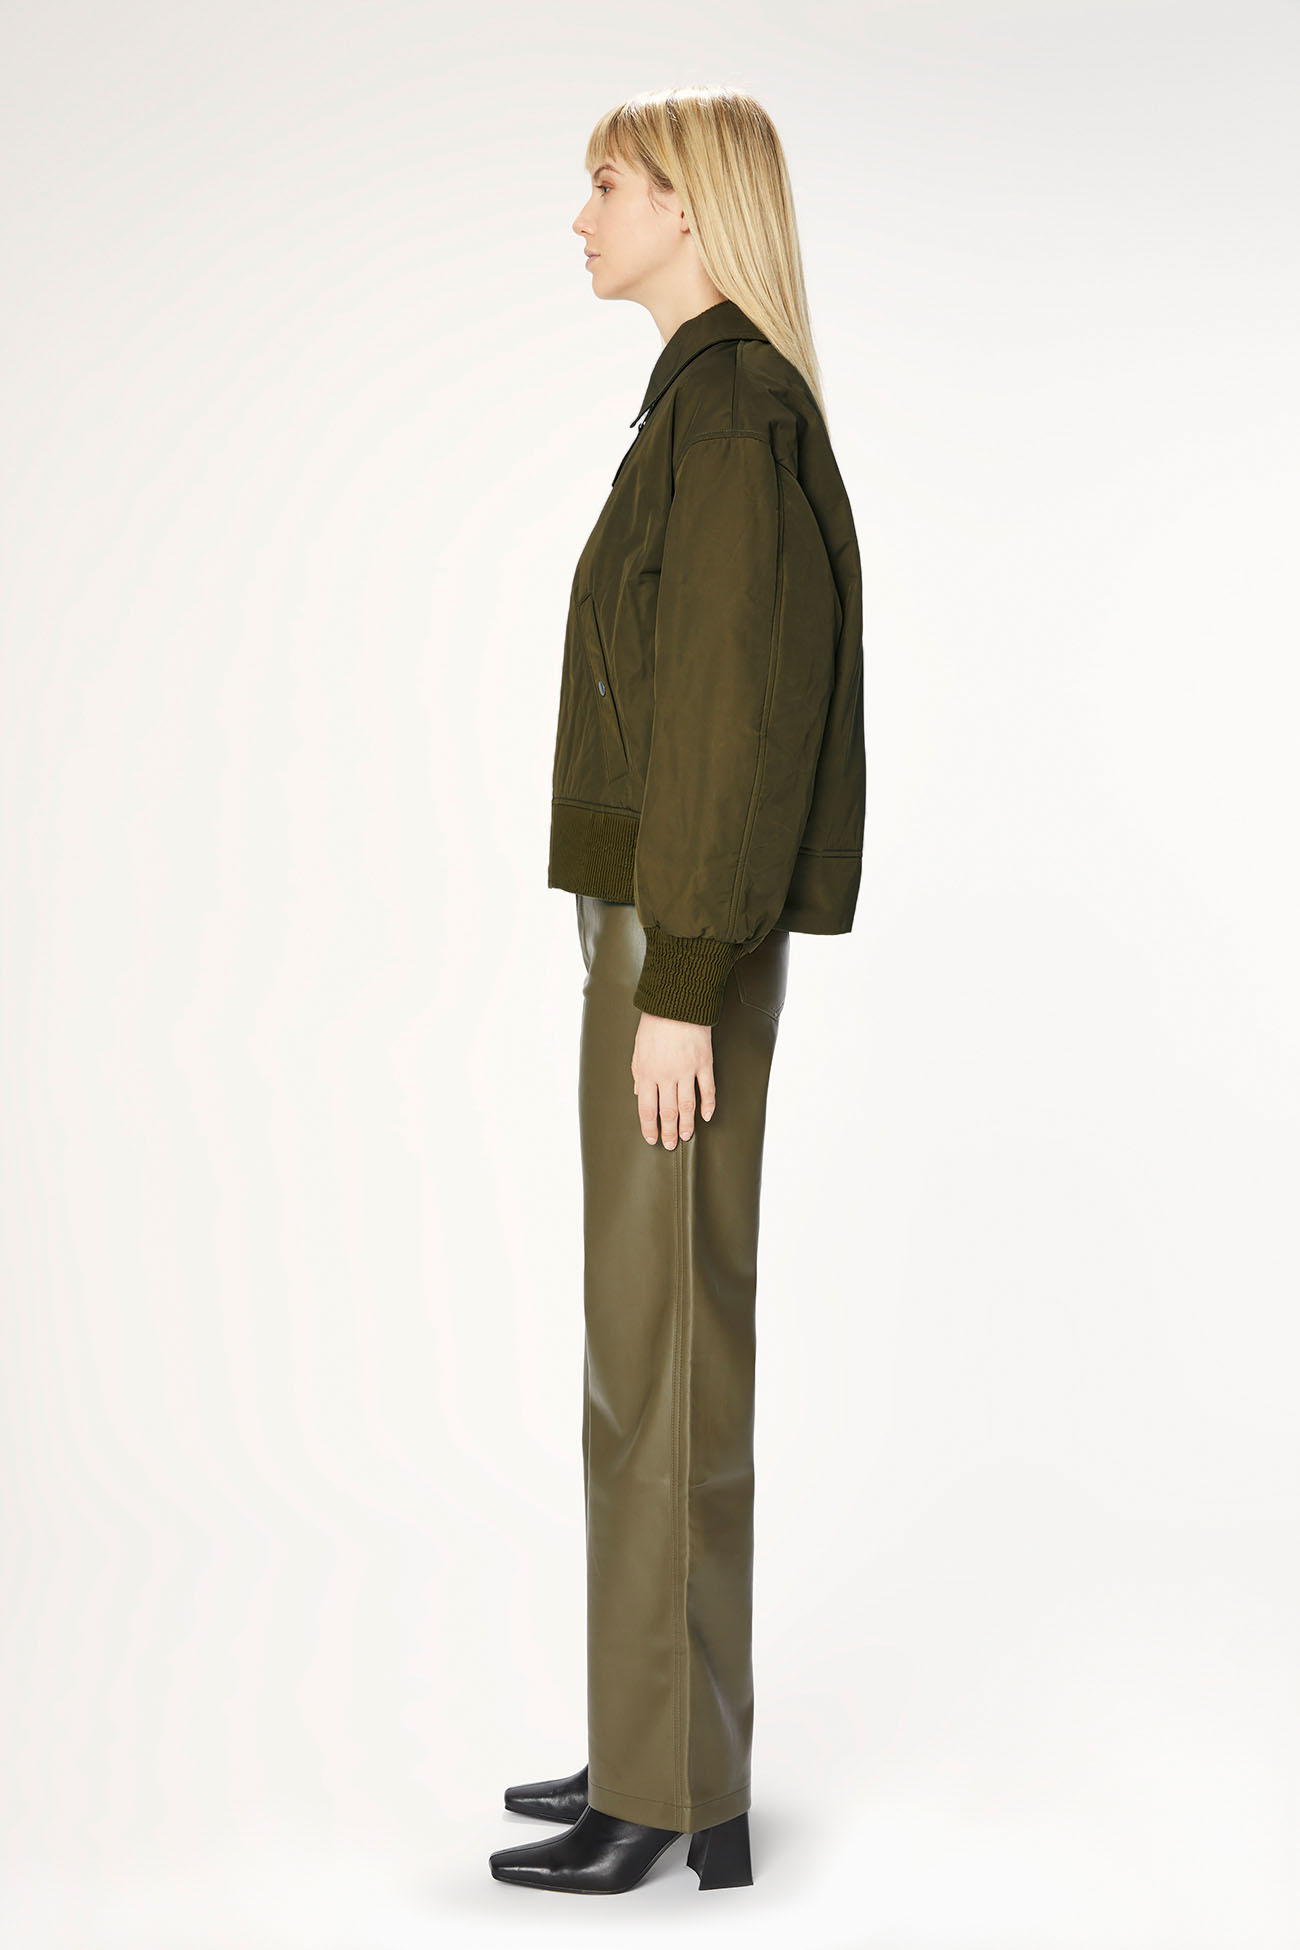 JACKET 9166 MADE IN NYLON MEMORY - ARMY GREEN - OOF WEAR